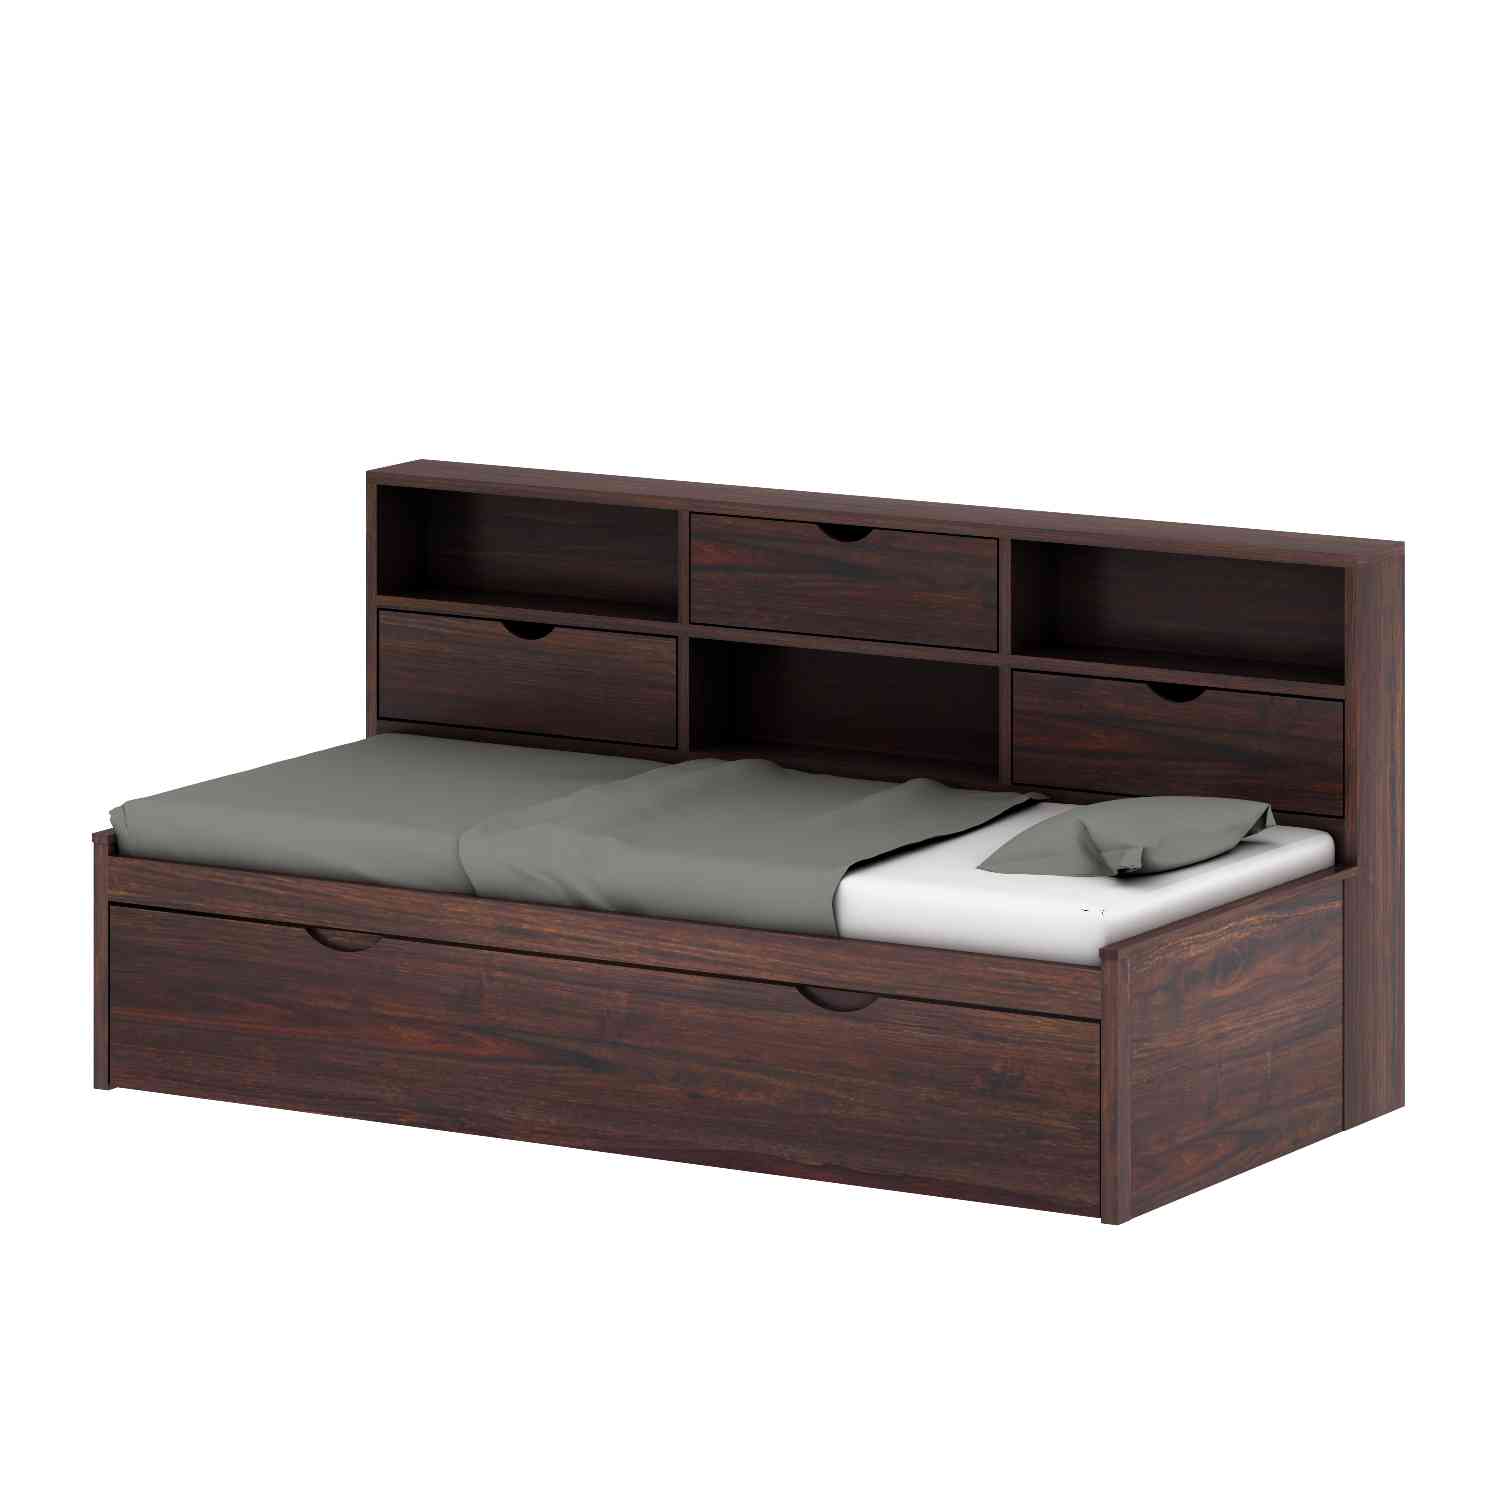 Livinn Solid Sheesham Wood Trundle Bed For Kids (Without Mattress, Walnut Finish)